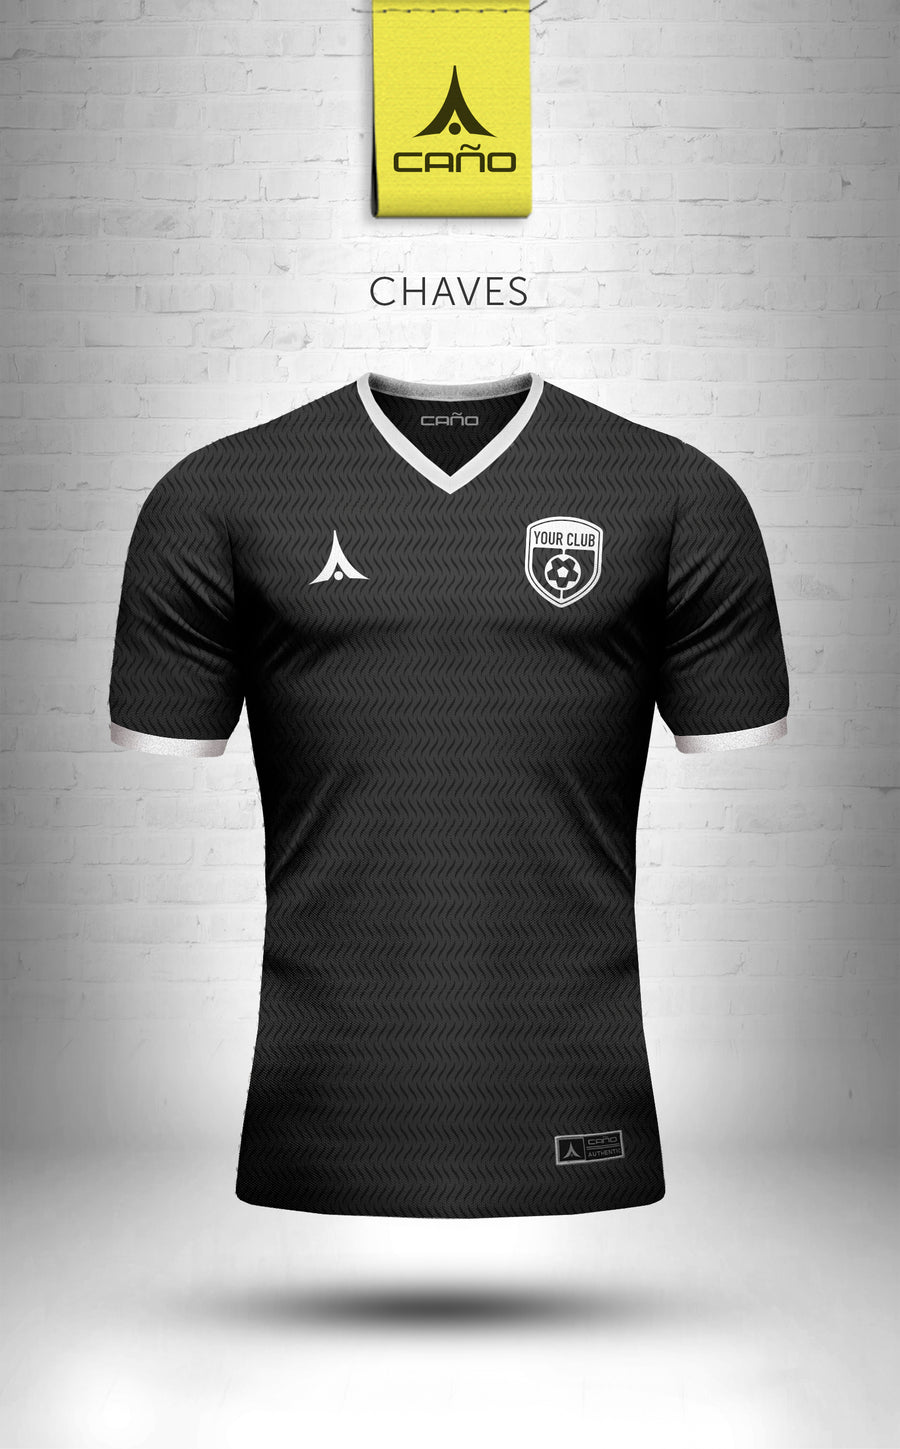 Chaves in black/white